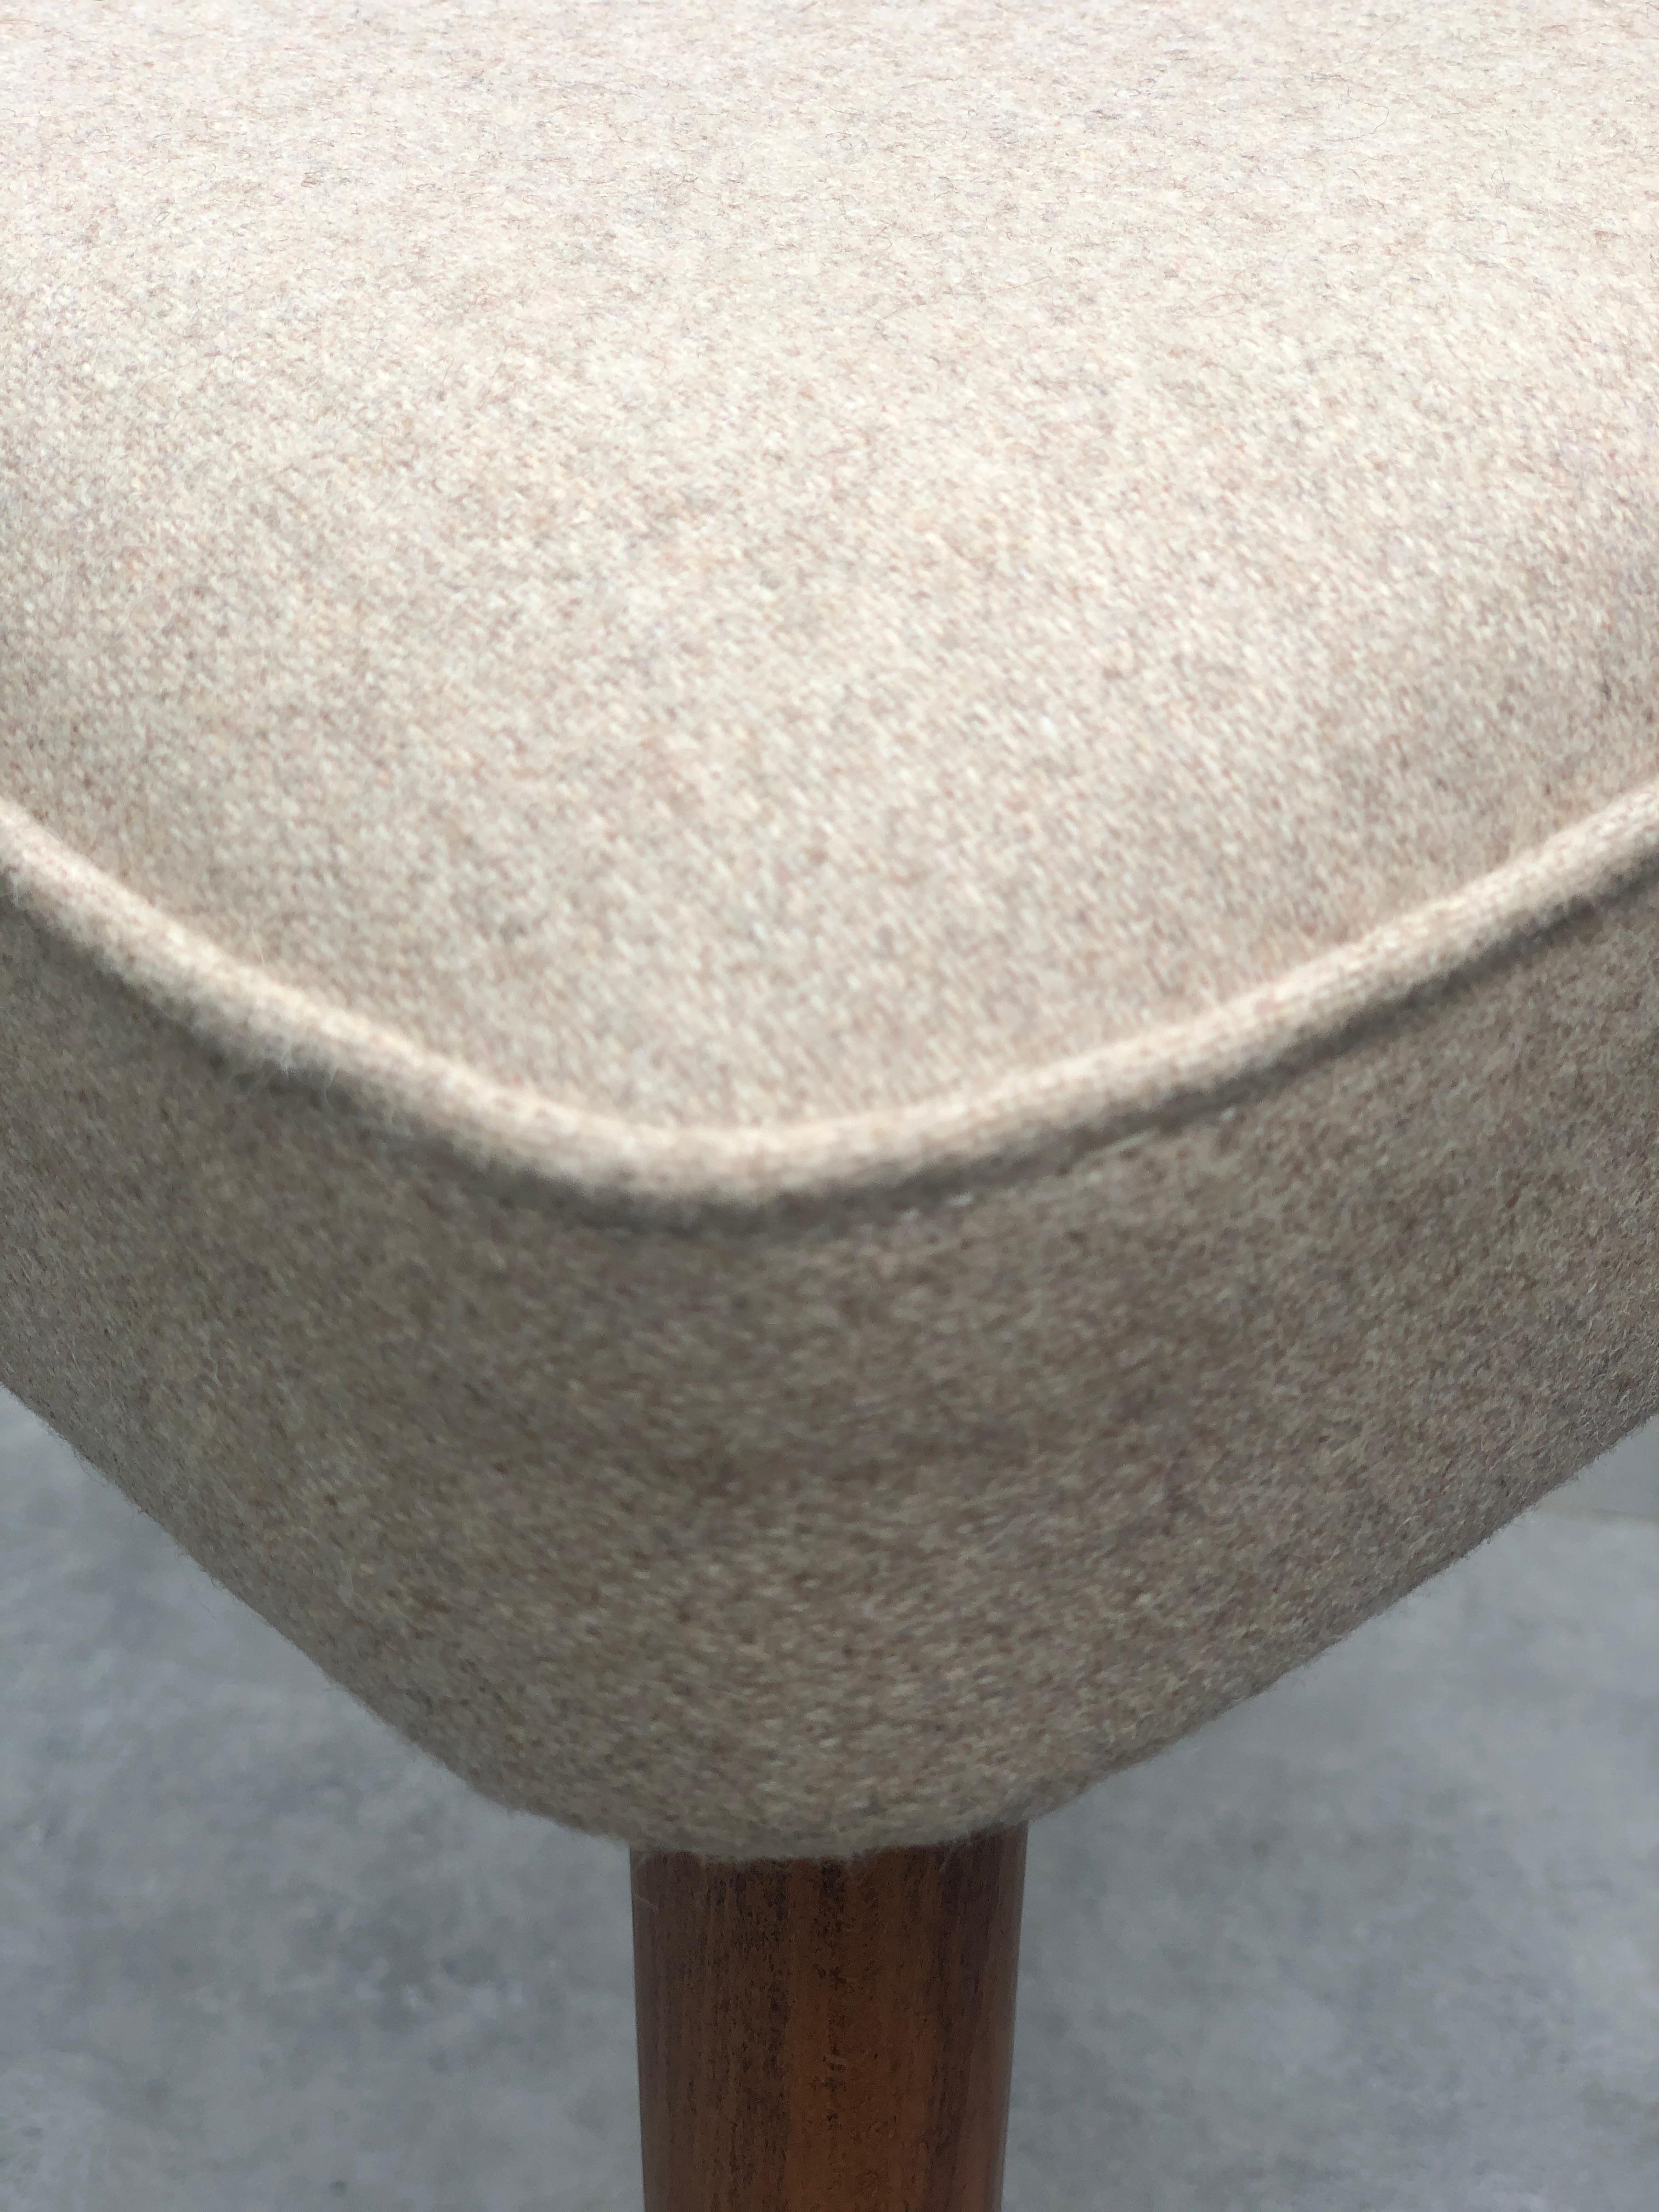 Beige Wool Shell Dining Chair by Lesniewski, 1960s For Sale 1